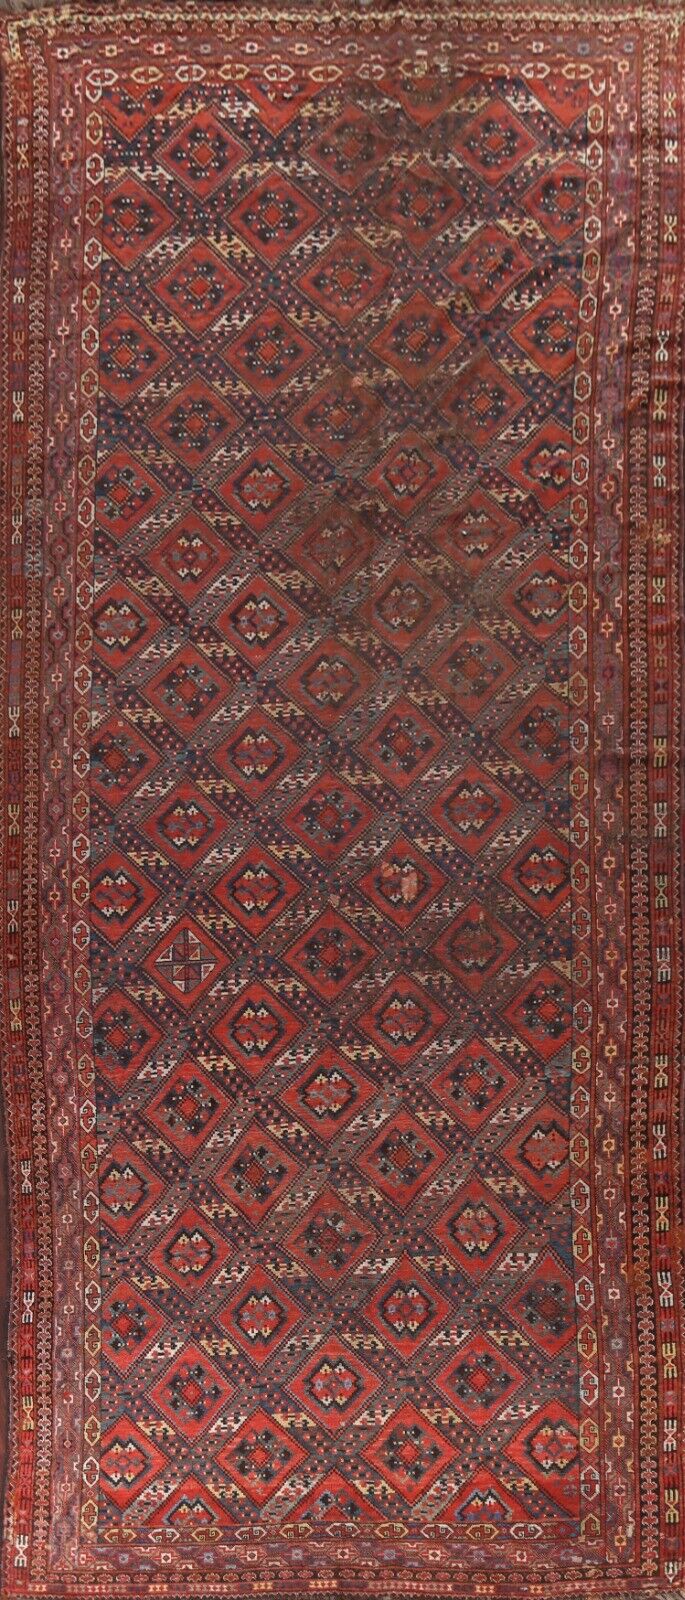 Pre-1900 Antique Vegetable Dye Turkoman Geometric Area Rug Hand-knotted 9\'x20\'